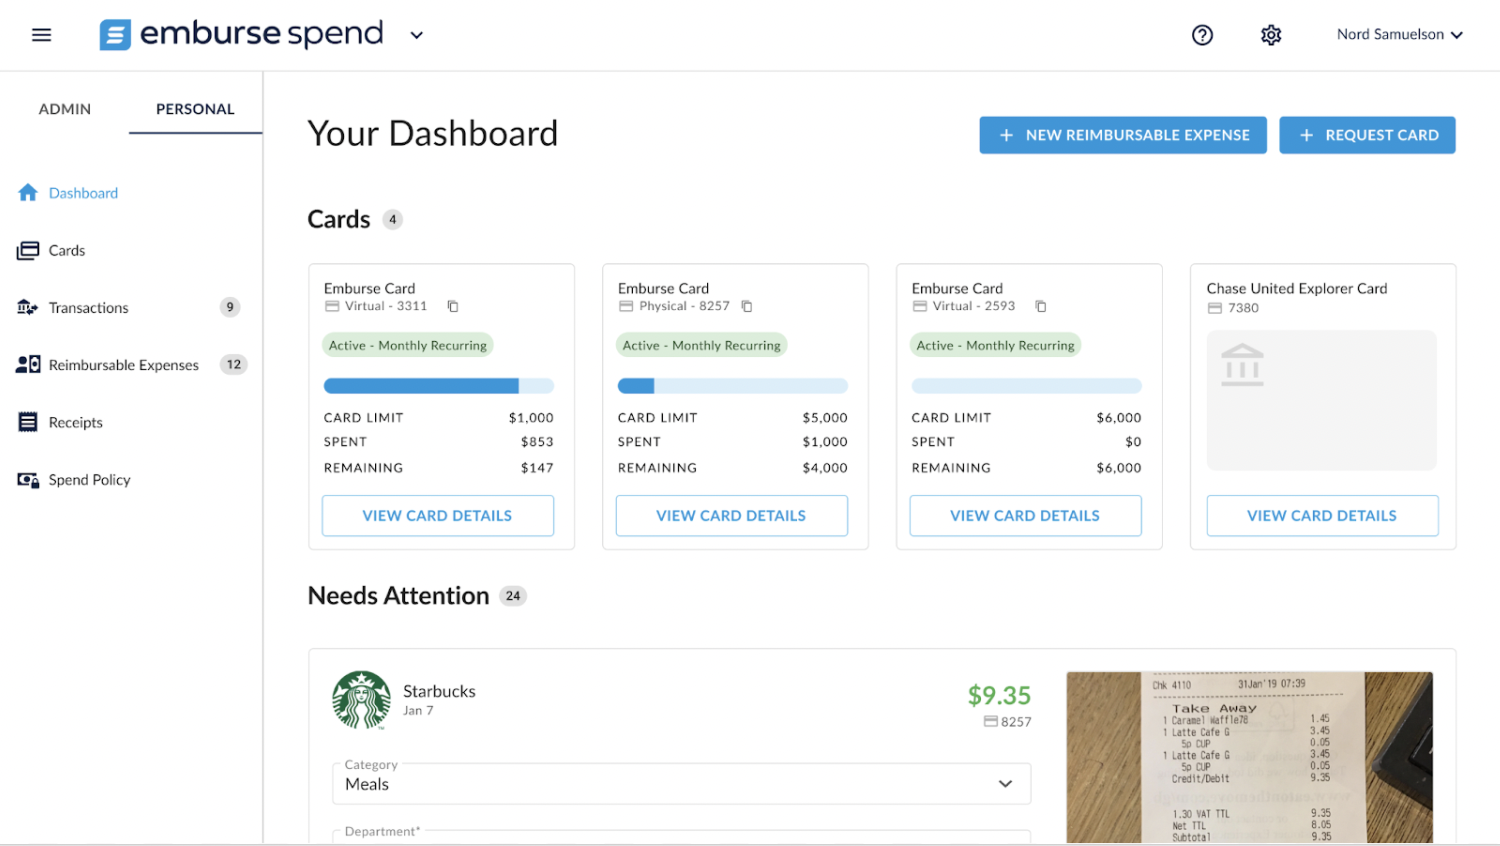 This is the dashboard where card users review all of their card activity, address outstanding items, and request additional cards for new spending needs.